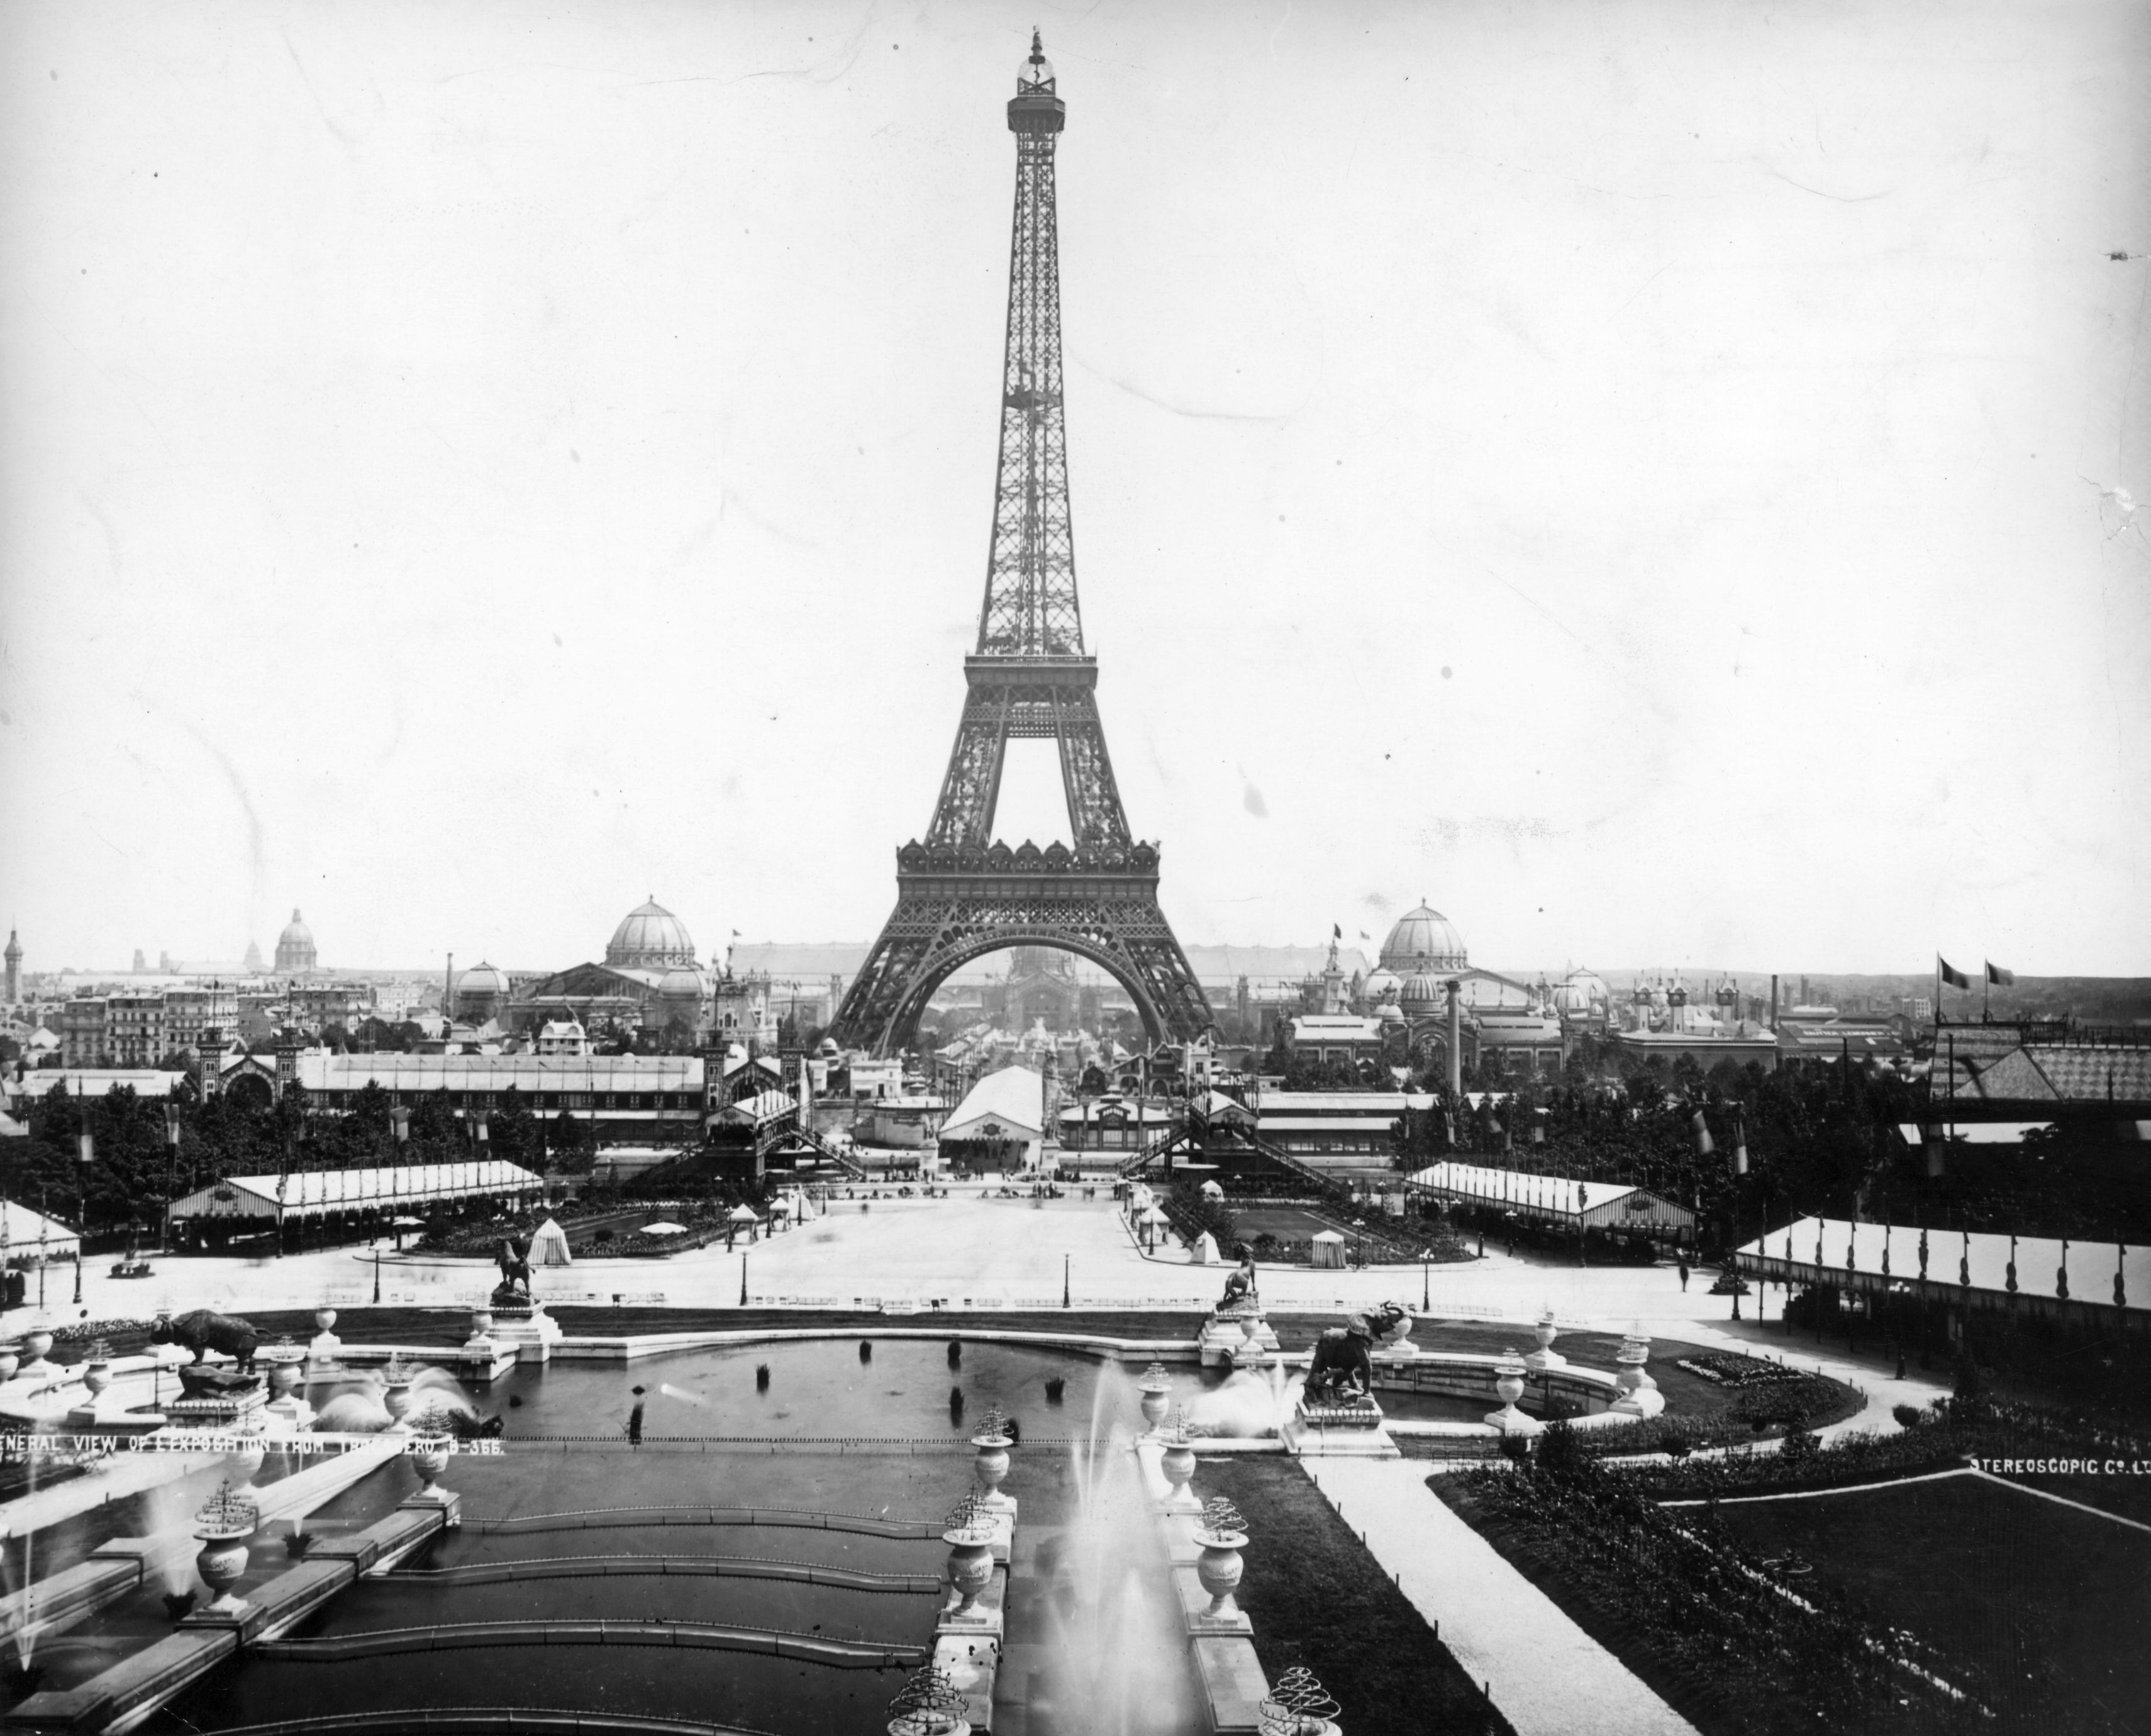 The Eiffel Tower and the Exposition Universelle in Paris in 1889 (Getty).